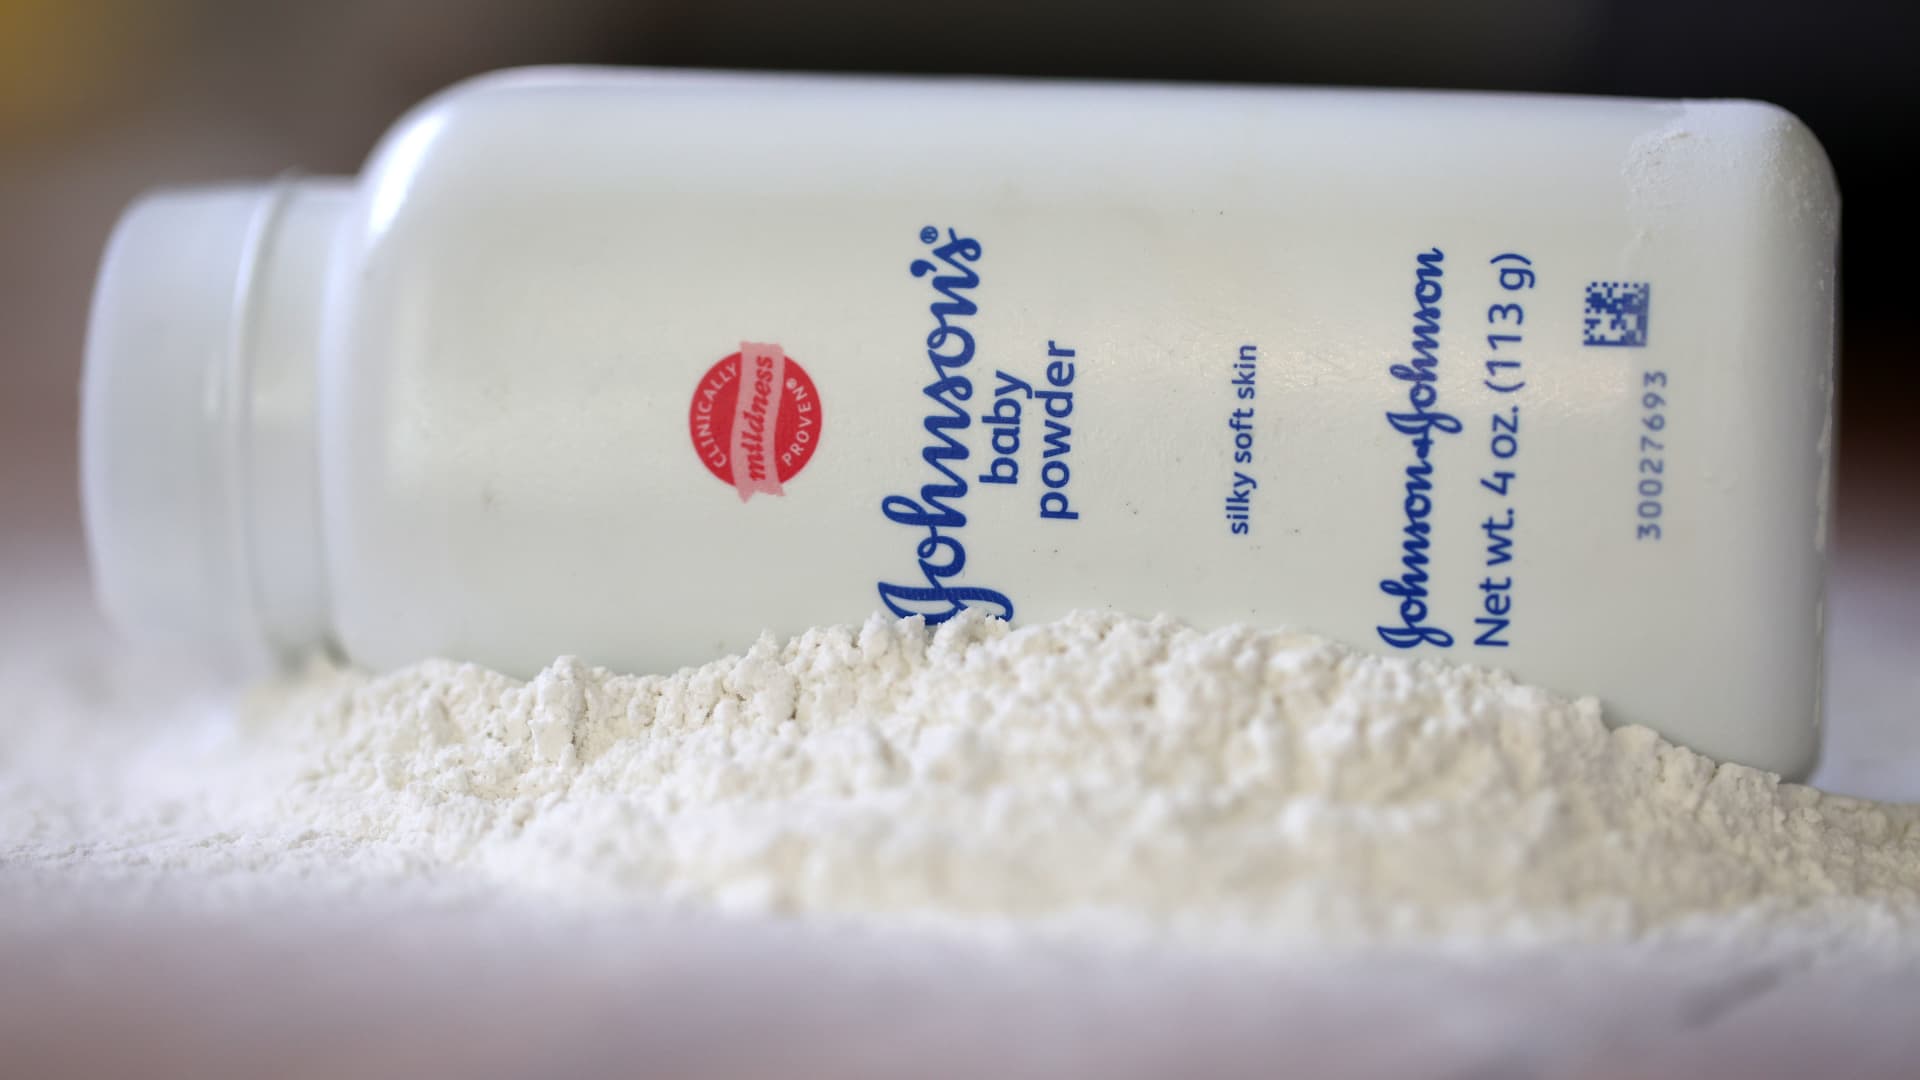 Here’s what Jim Cramer thinks about J&J stock after a pivotal talc case verdict